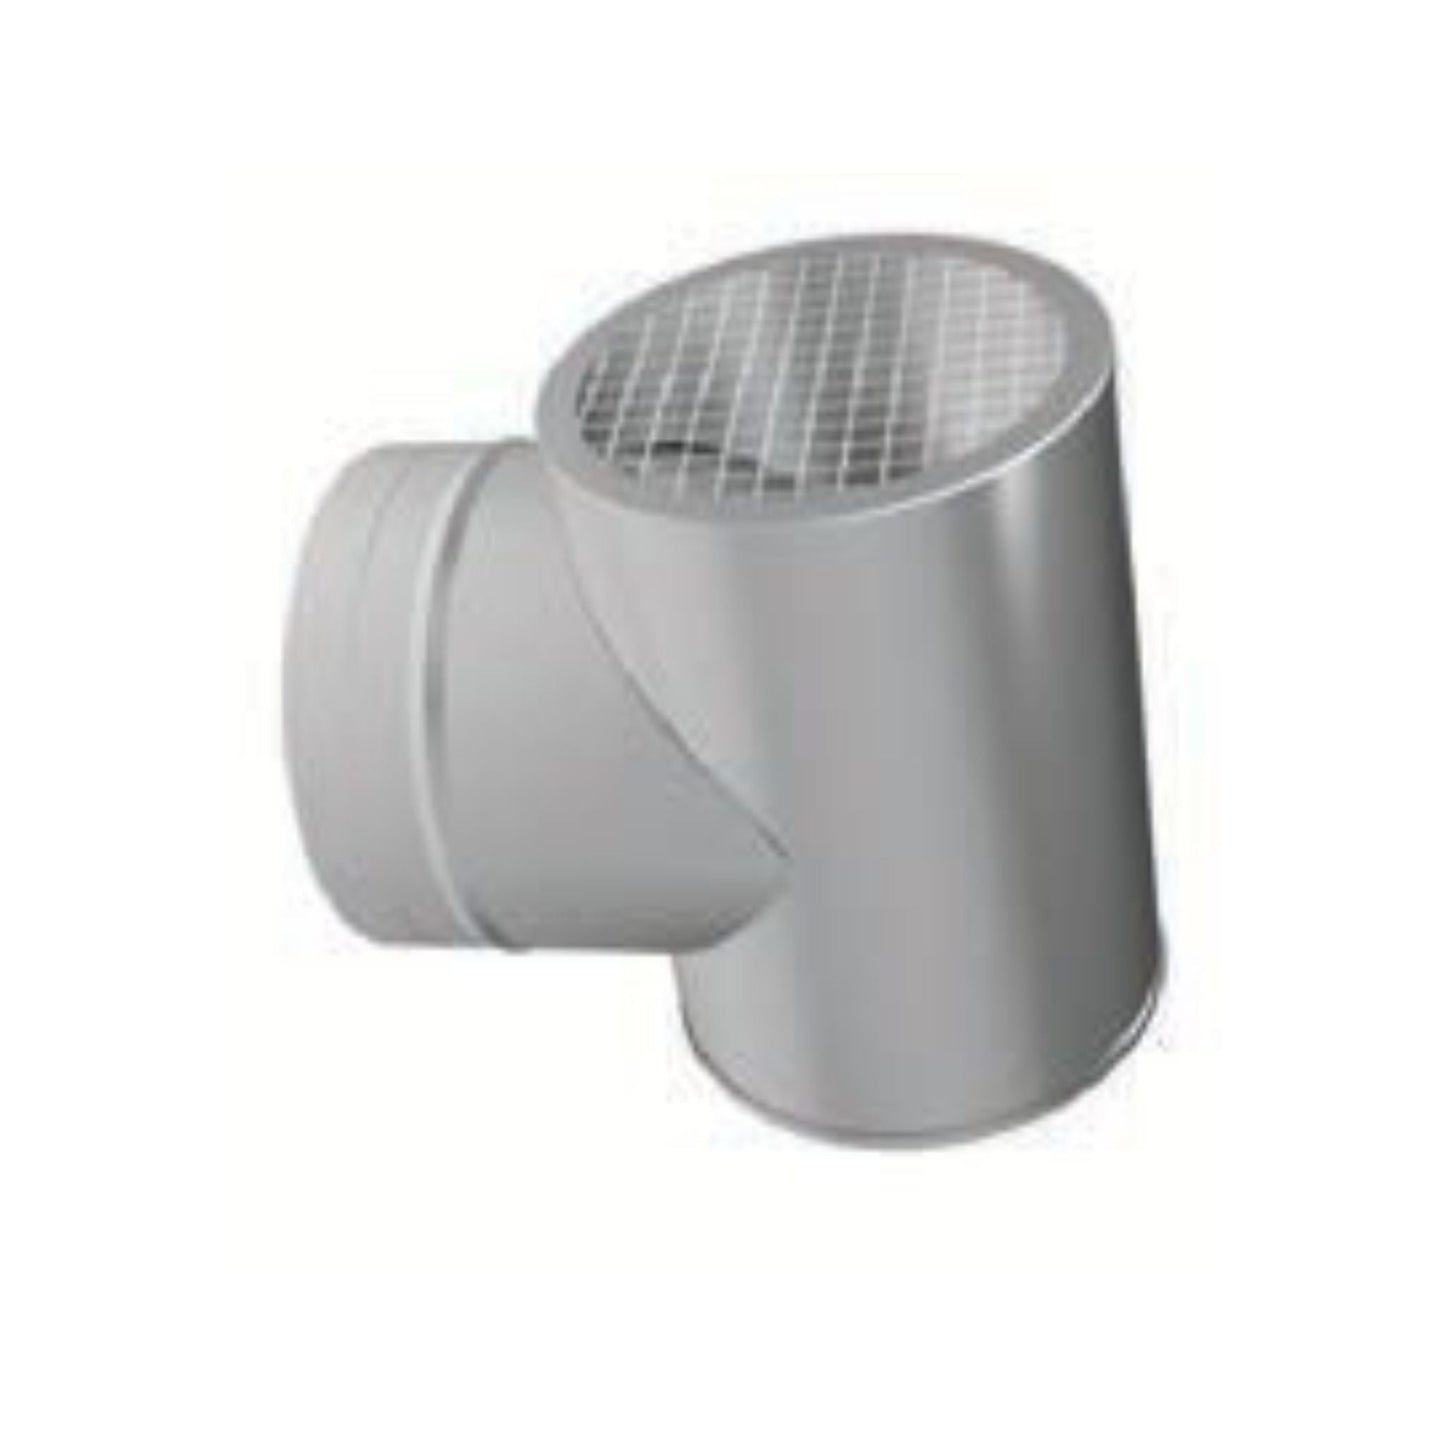 DuraVent FasNSeal 8" 29-4C Stainless Steel Termination Tee